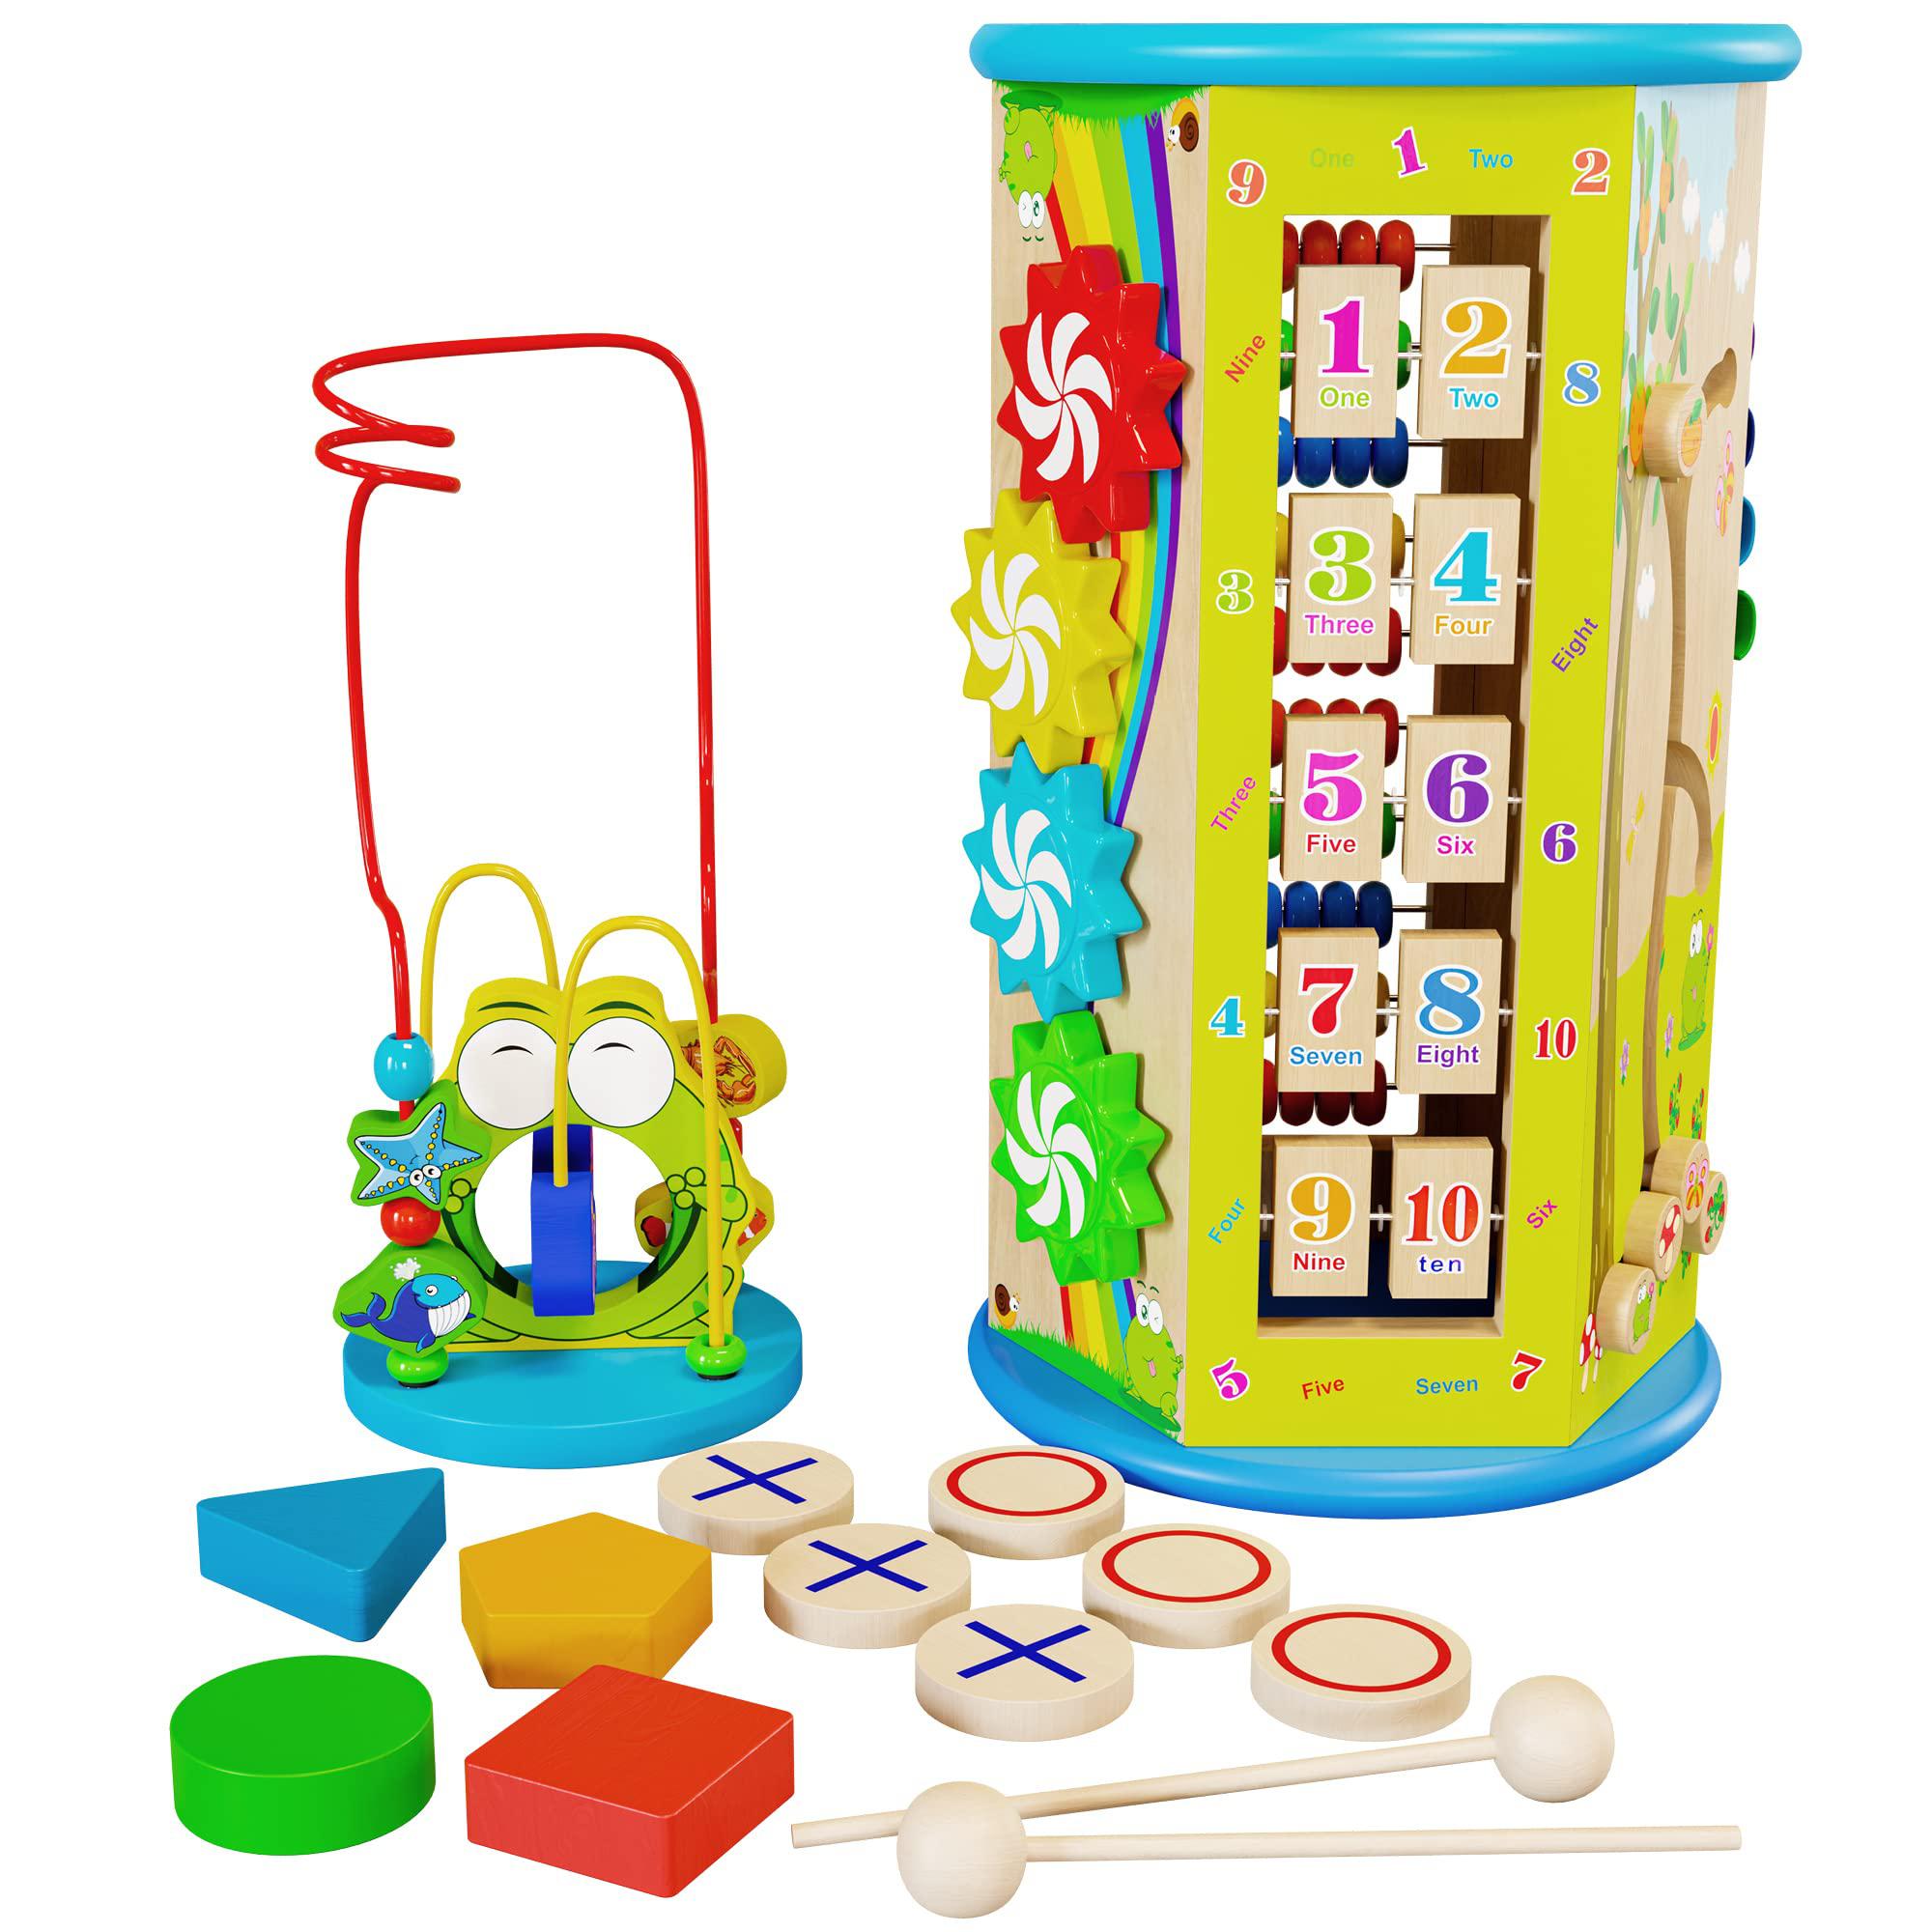 KIDDERY TOYS wooden activity cube for toddlers 1-3 with bead maze - birthday gift busy baby activity cube for babies 12 months - standing 